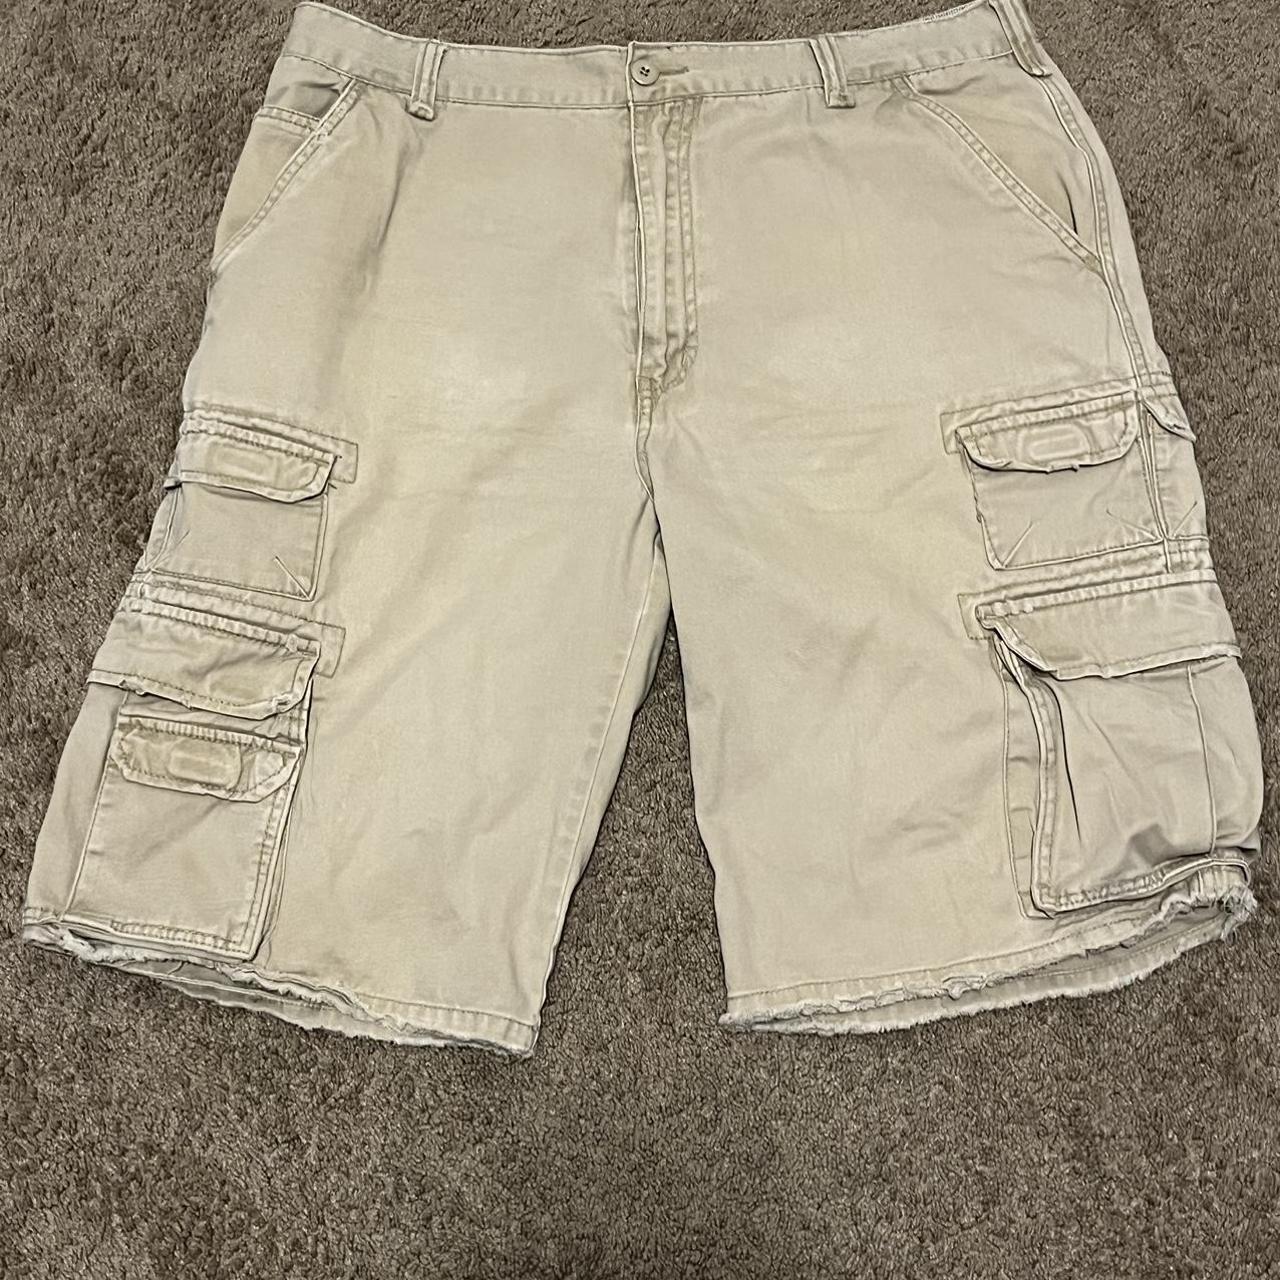 Plugg Co cargo shorts!!! in size 36!! Cleaned very... - Depop